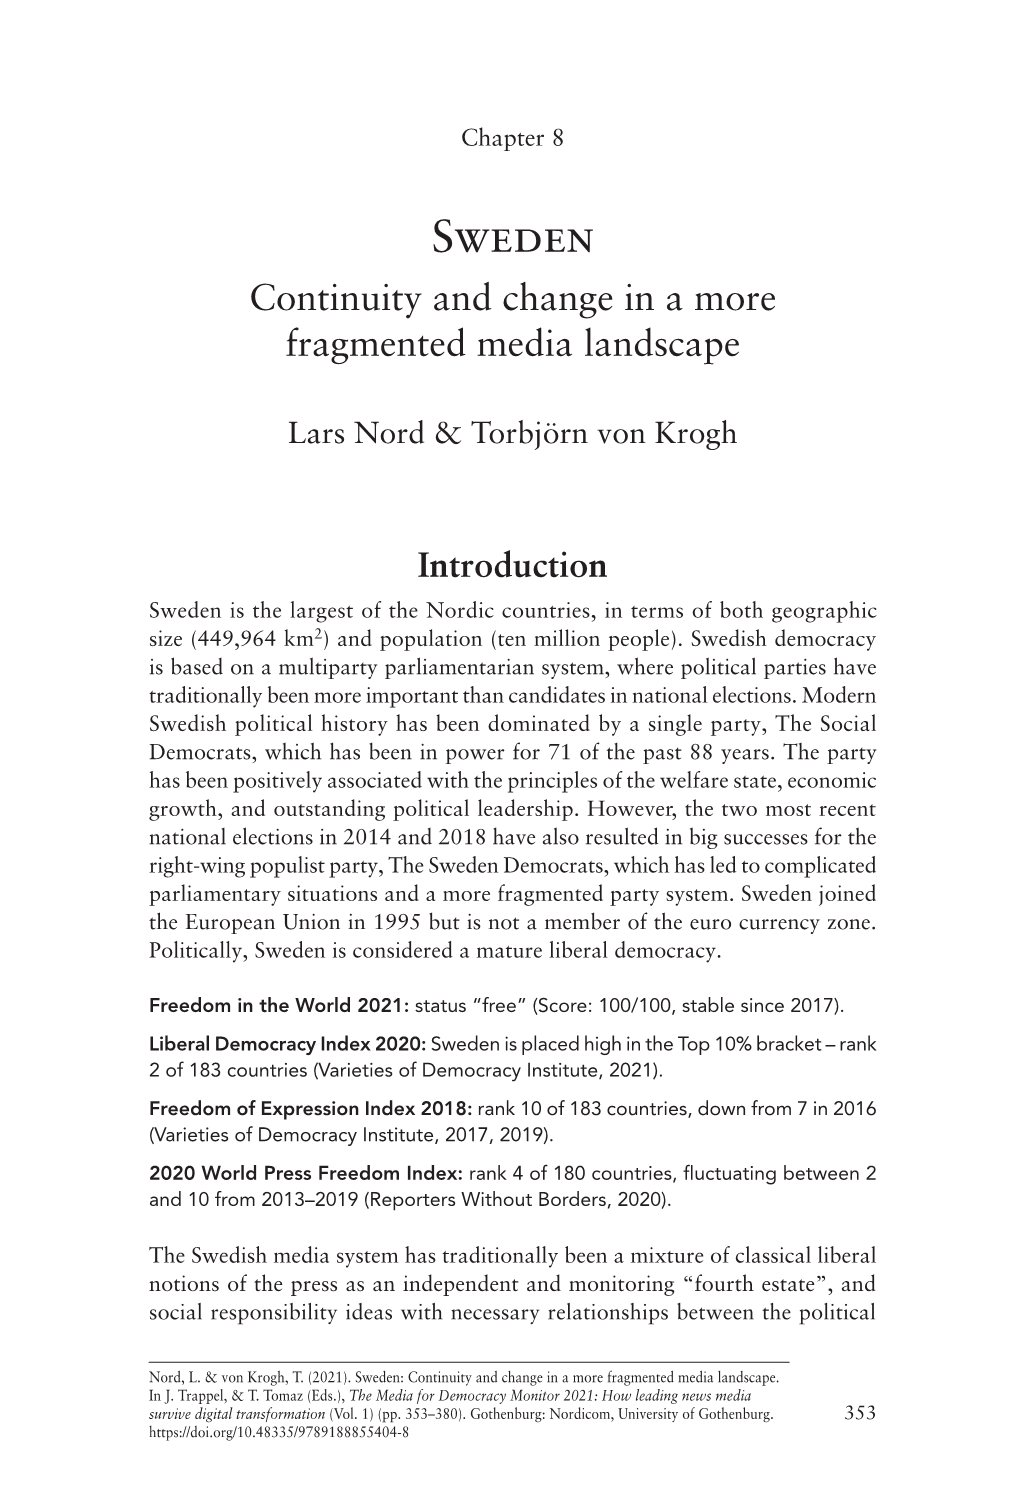 Chapter 8. Sweden: Continuity and Change in a More